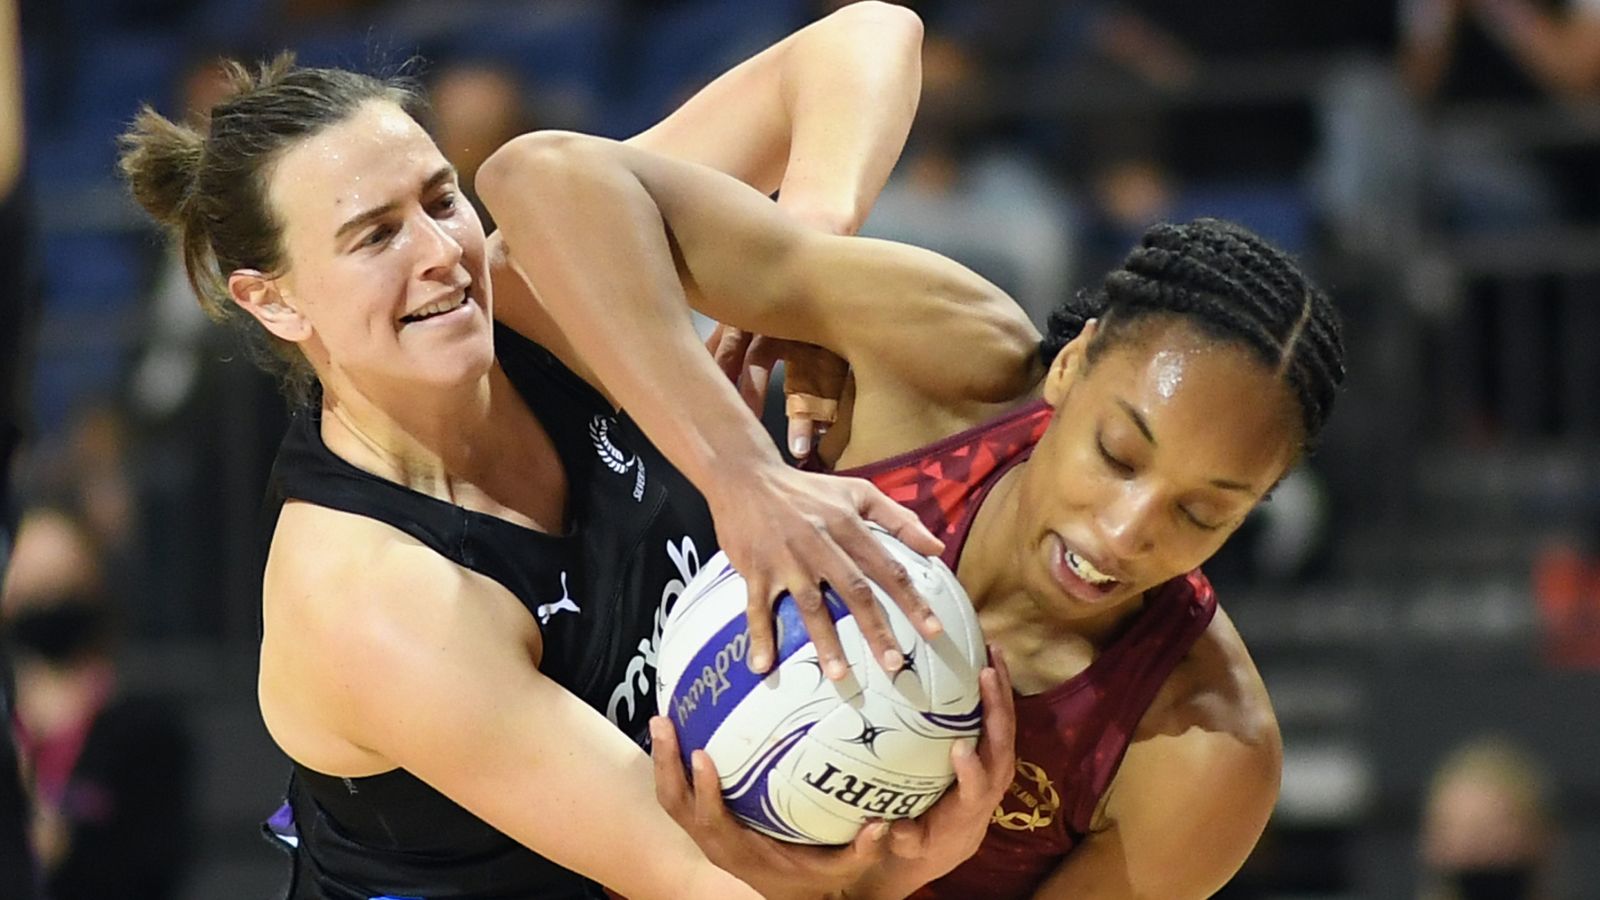 New Zealand Vs England Tamsin Greenway Analyses The Vitality Roses Series In New Zealand 9235